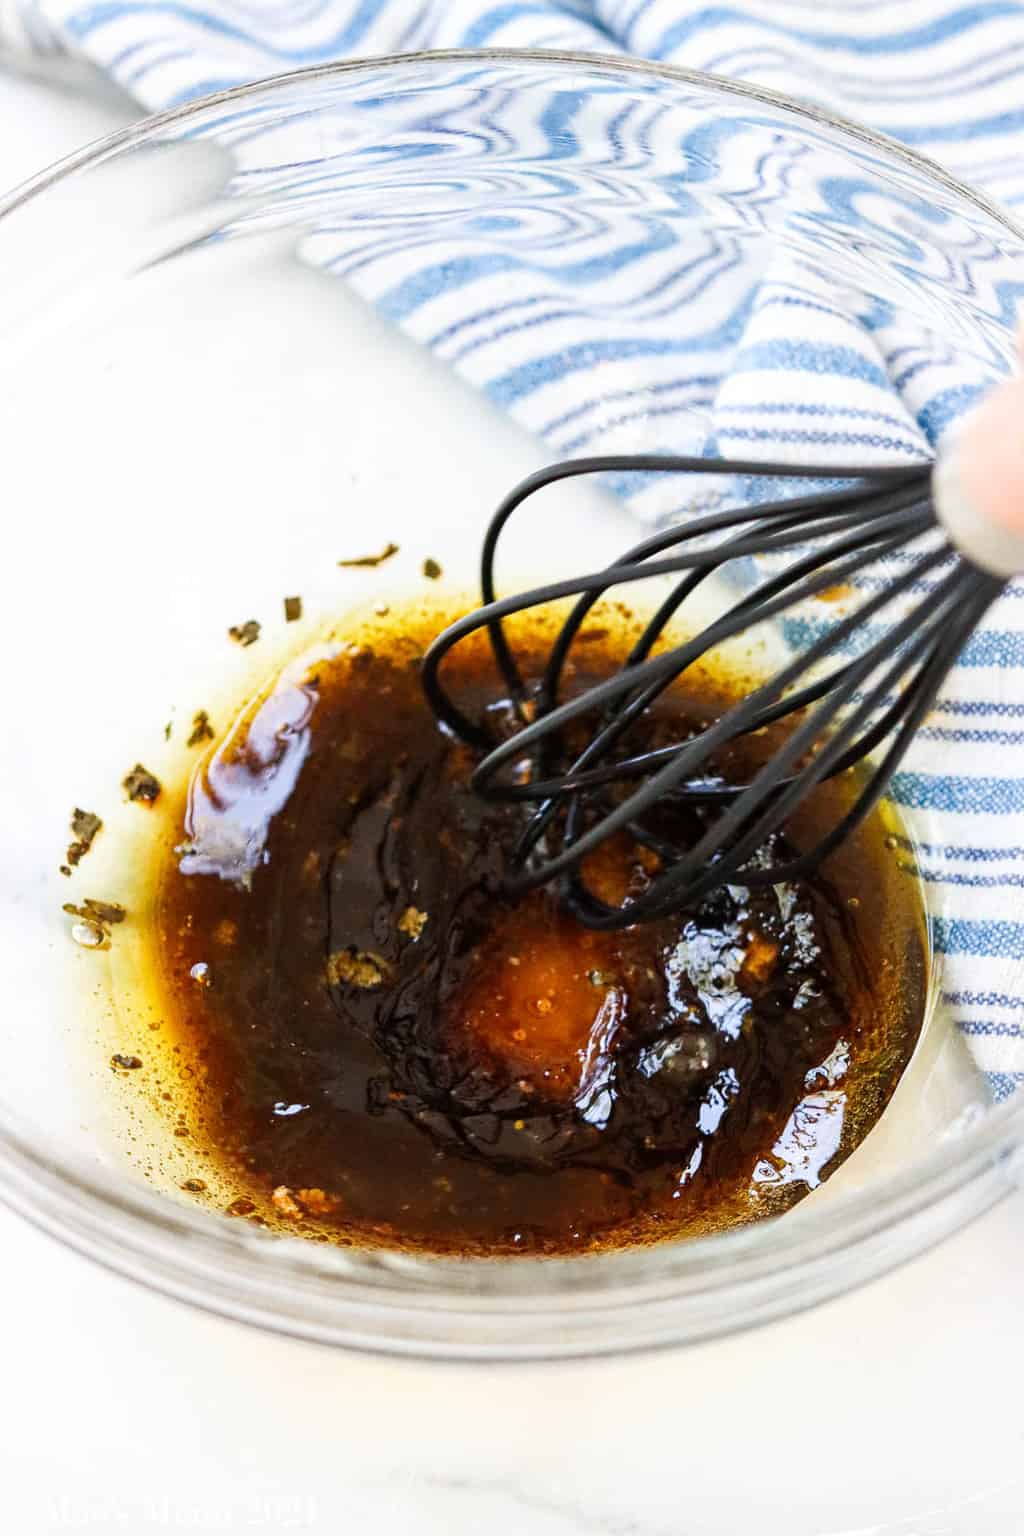 Whisking the balsamic vinaigrette together in a glass mixing bowl